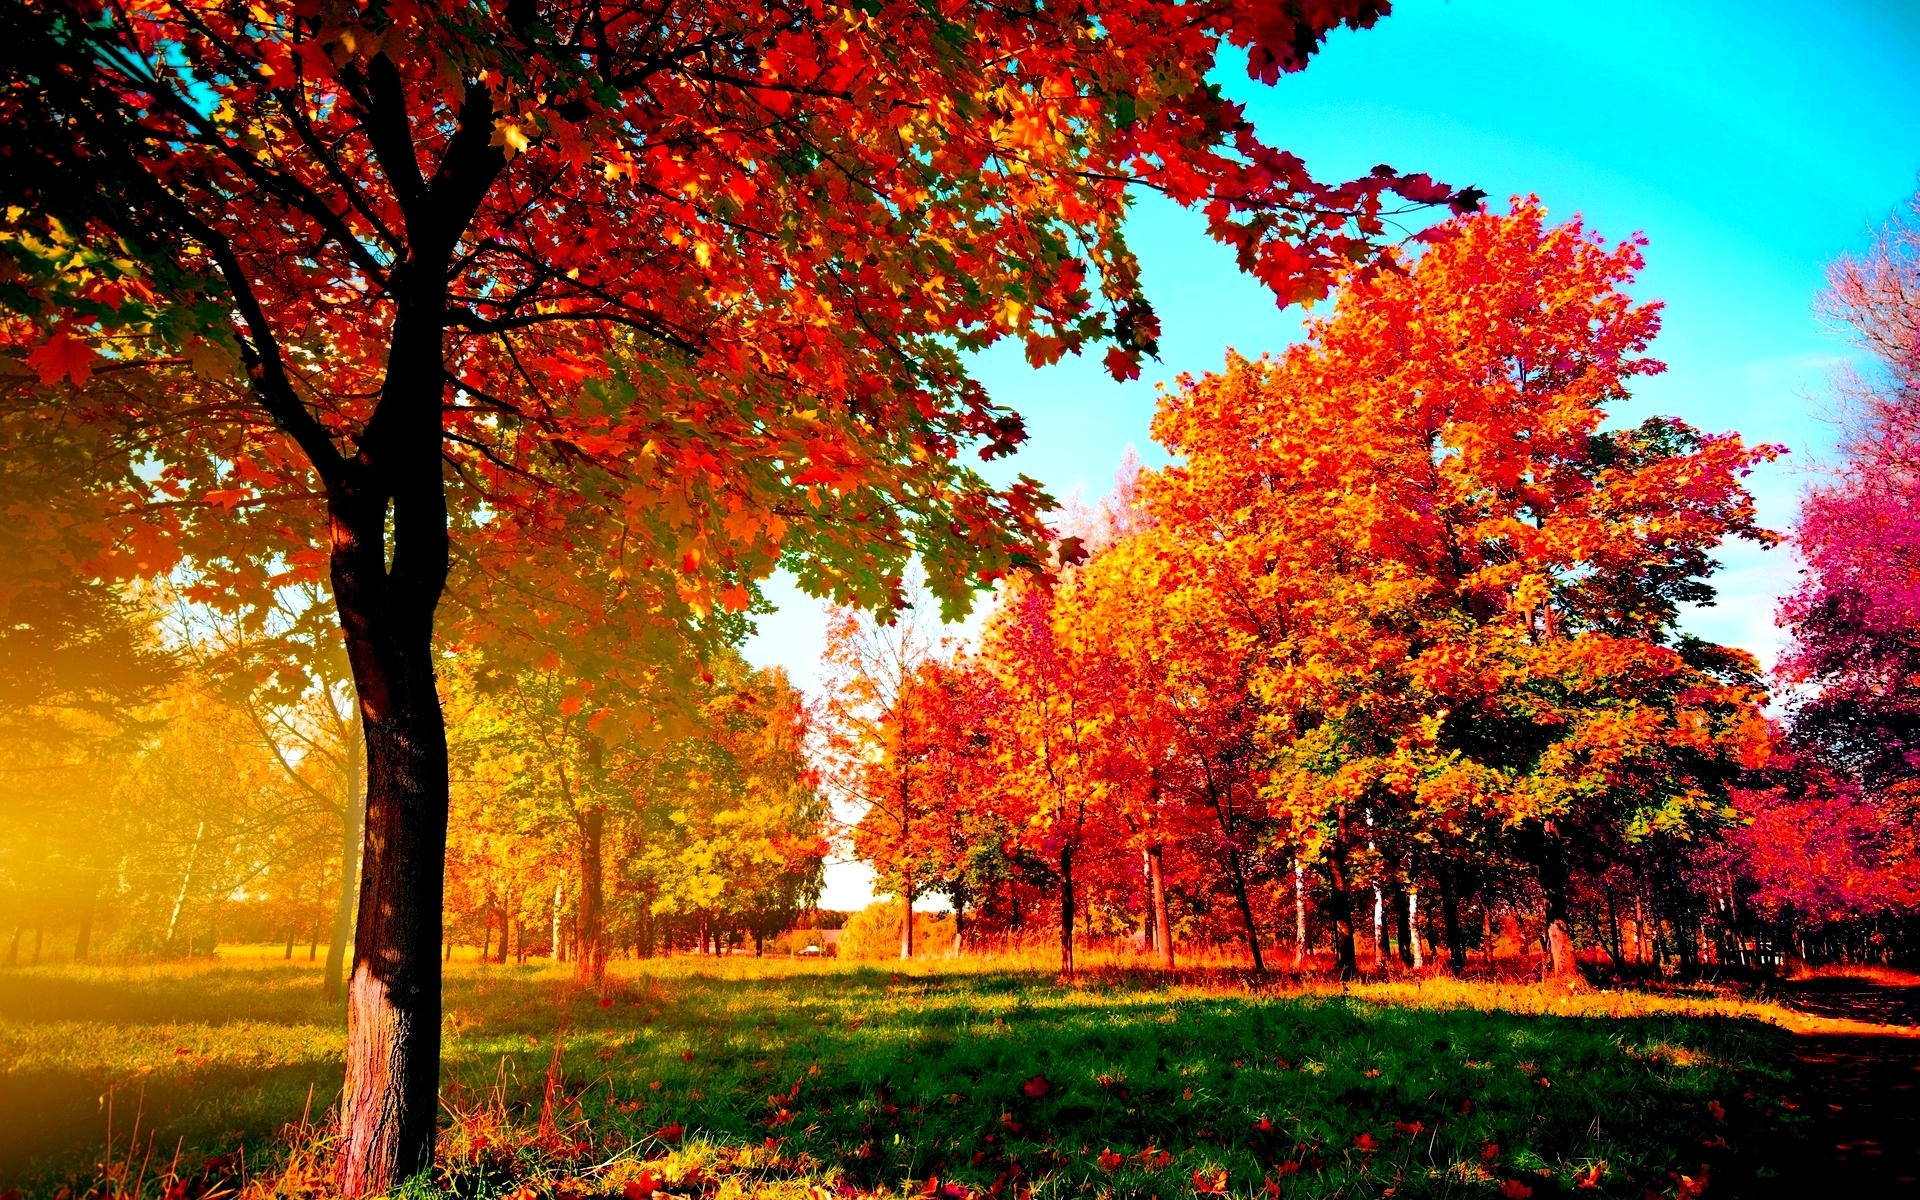 10 Best Autumn Pictures For Desktop Backgrounds Full Hd 1080p For Pc